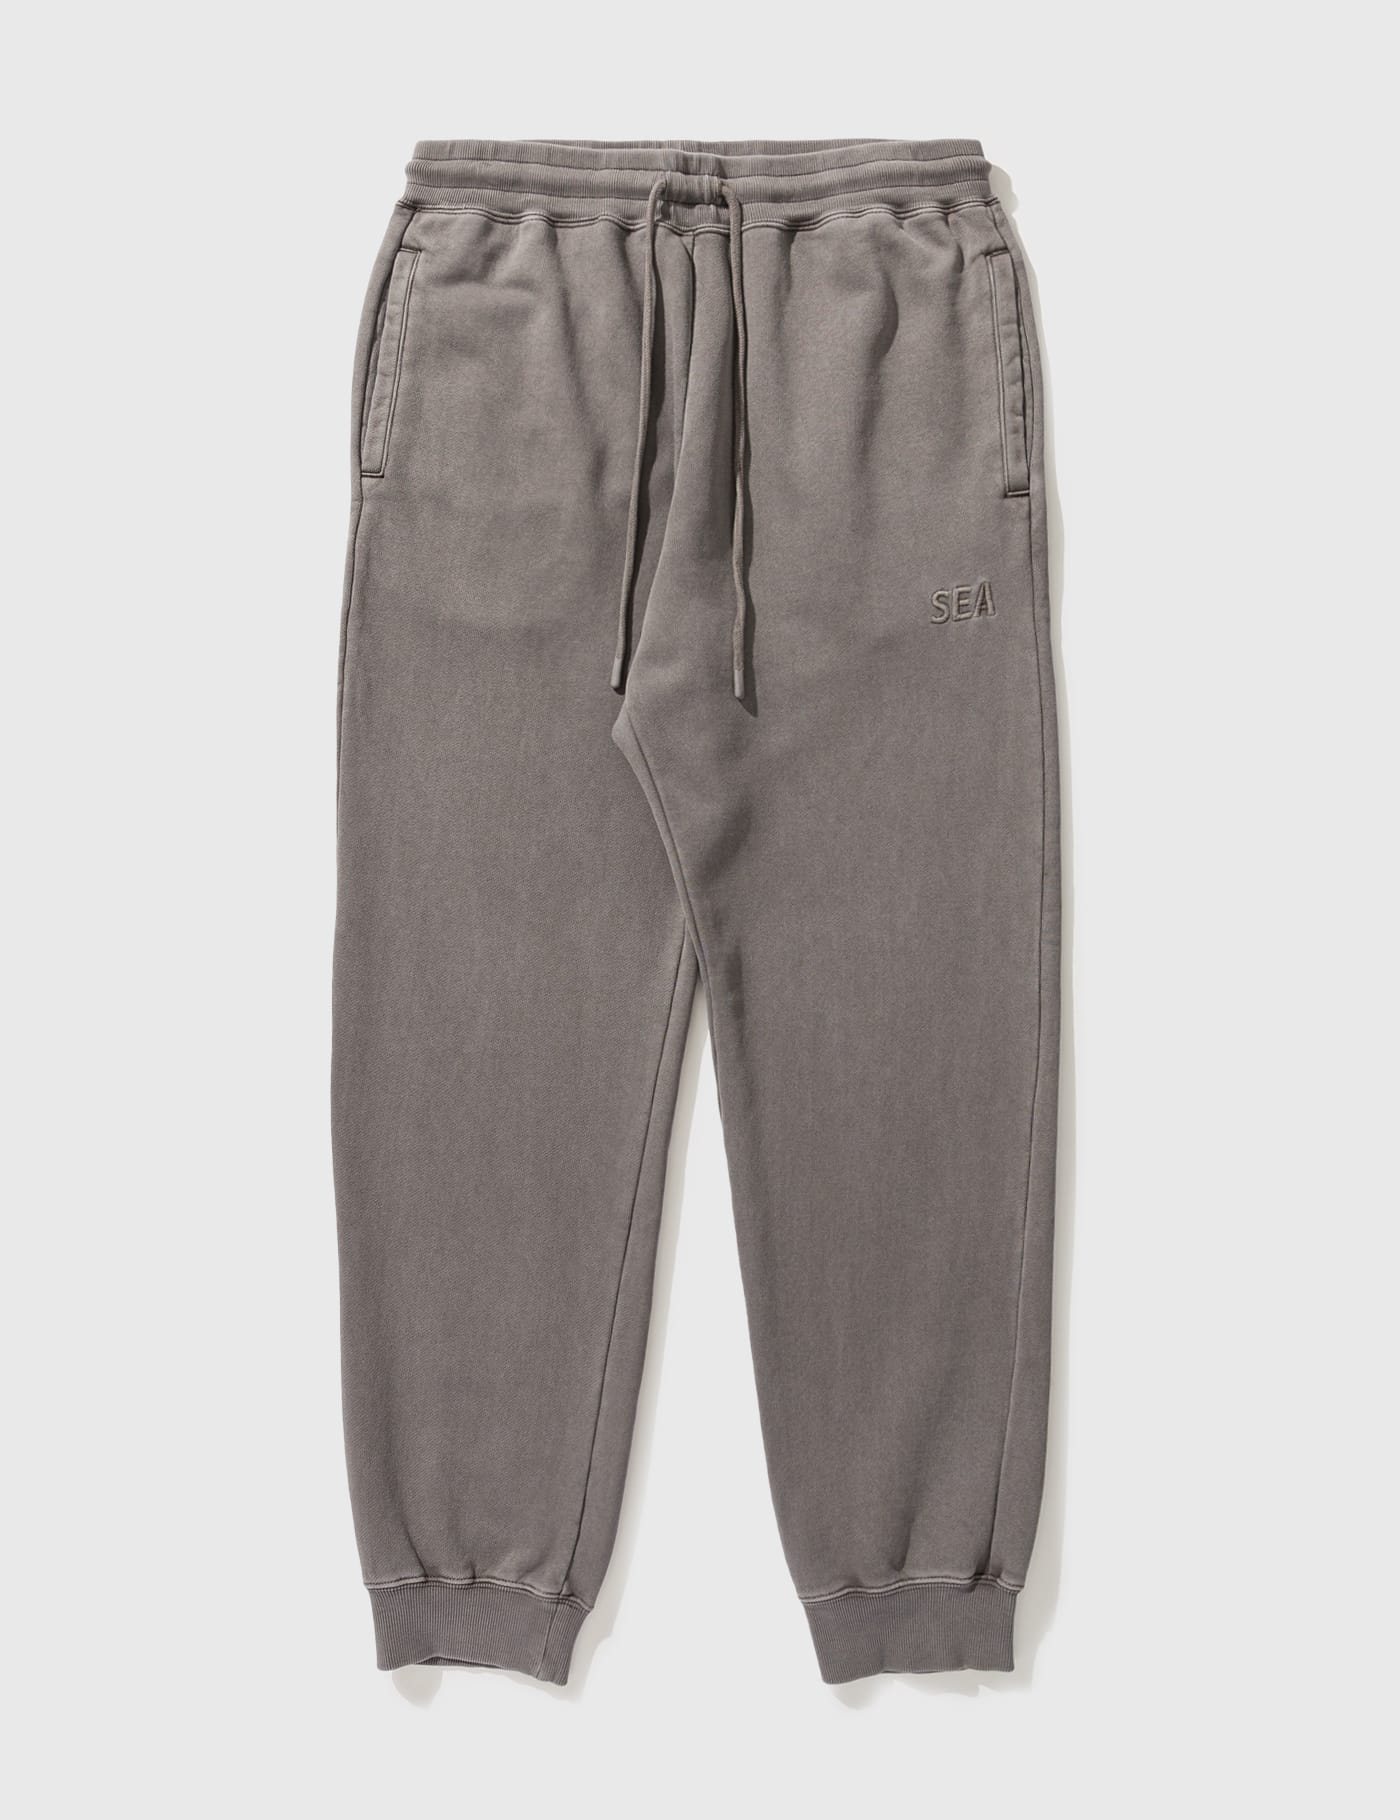 TIGHTBOOTH - Plaid Flannel Baggy Slacks | HBX - Globally Curated 